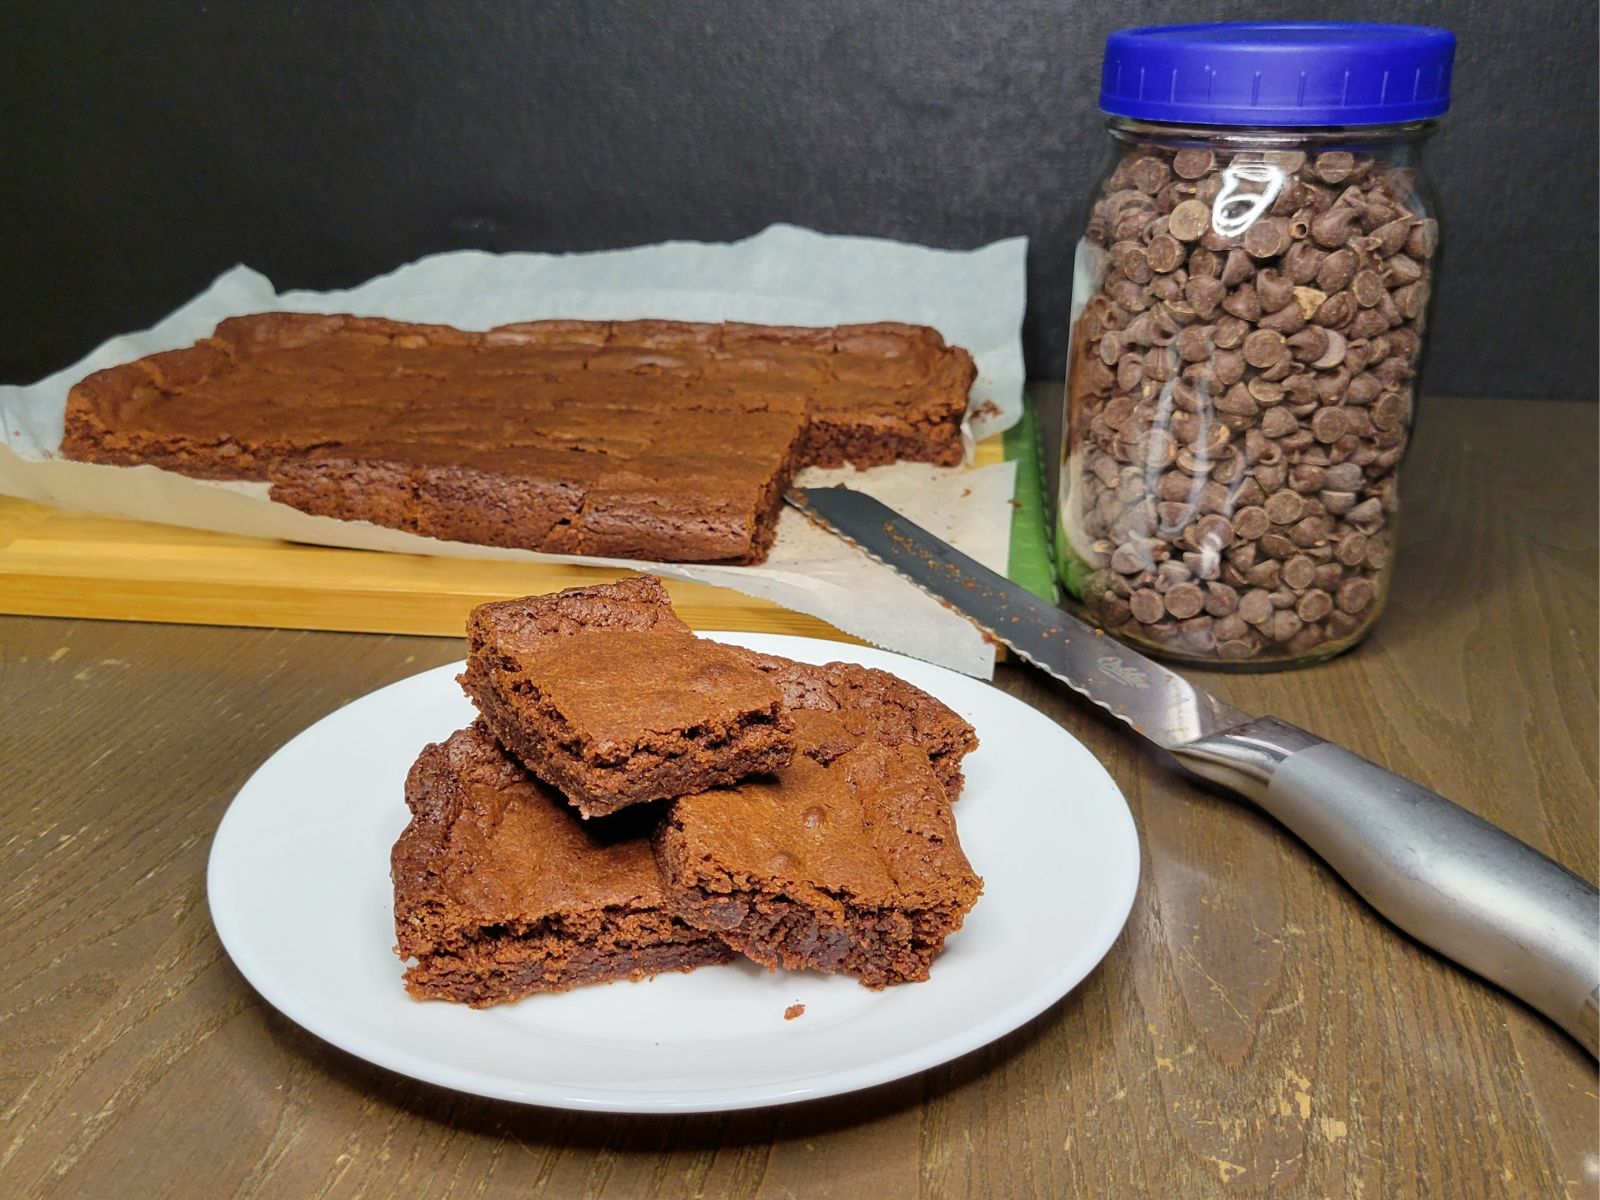 a plate of sliced Brownies made with fresh milled flour in front of a tray of uncut brownies next to a glass mason jar full of chocolate chips.